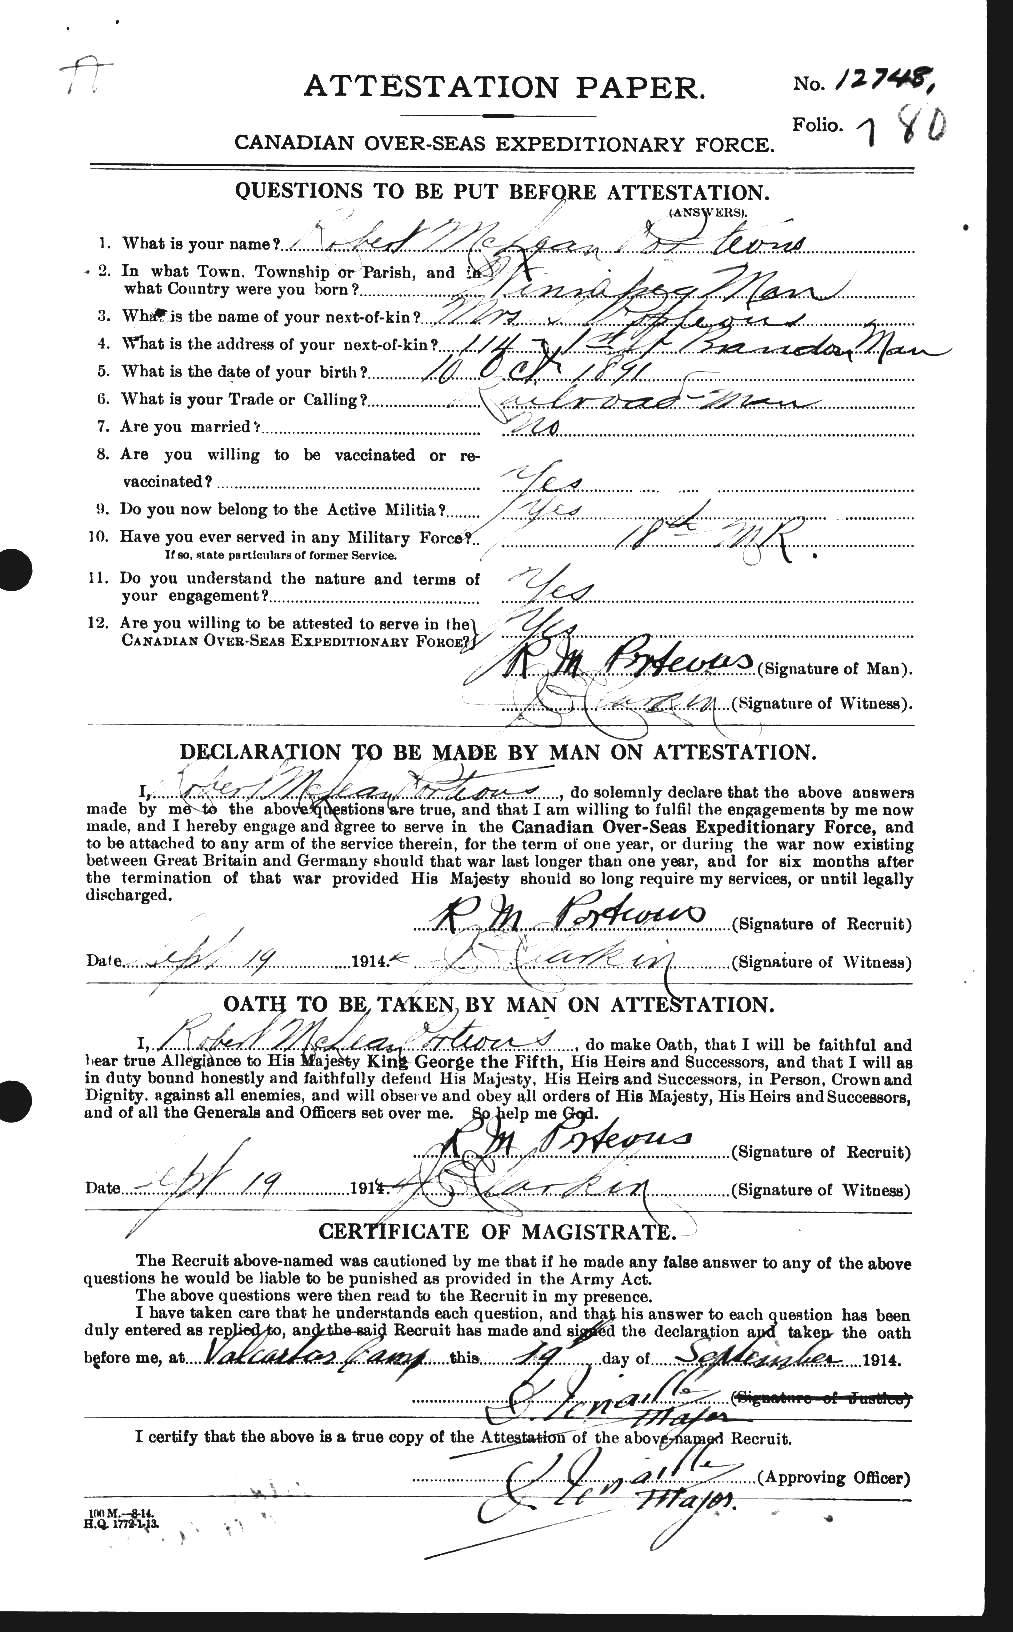 Personnel Records of the First World War - CEF 581749a